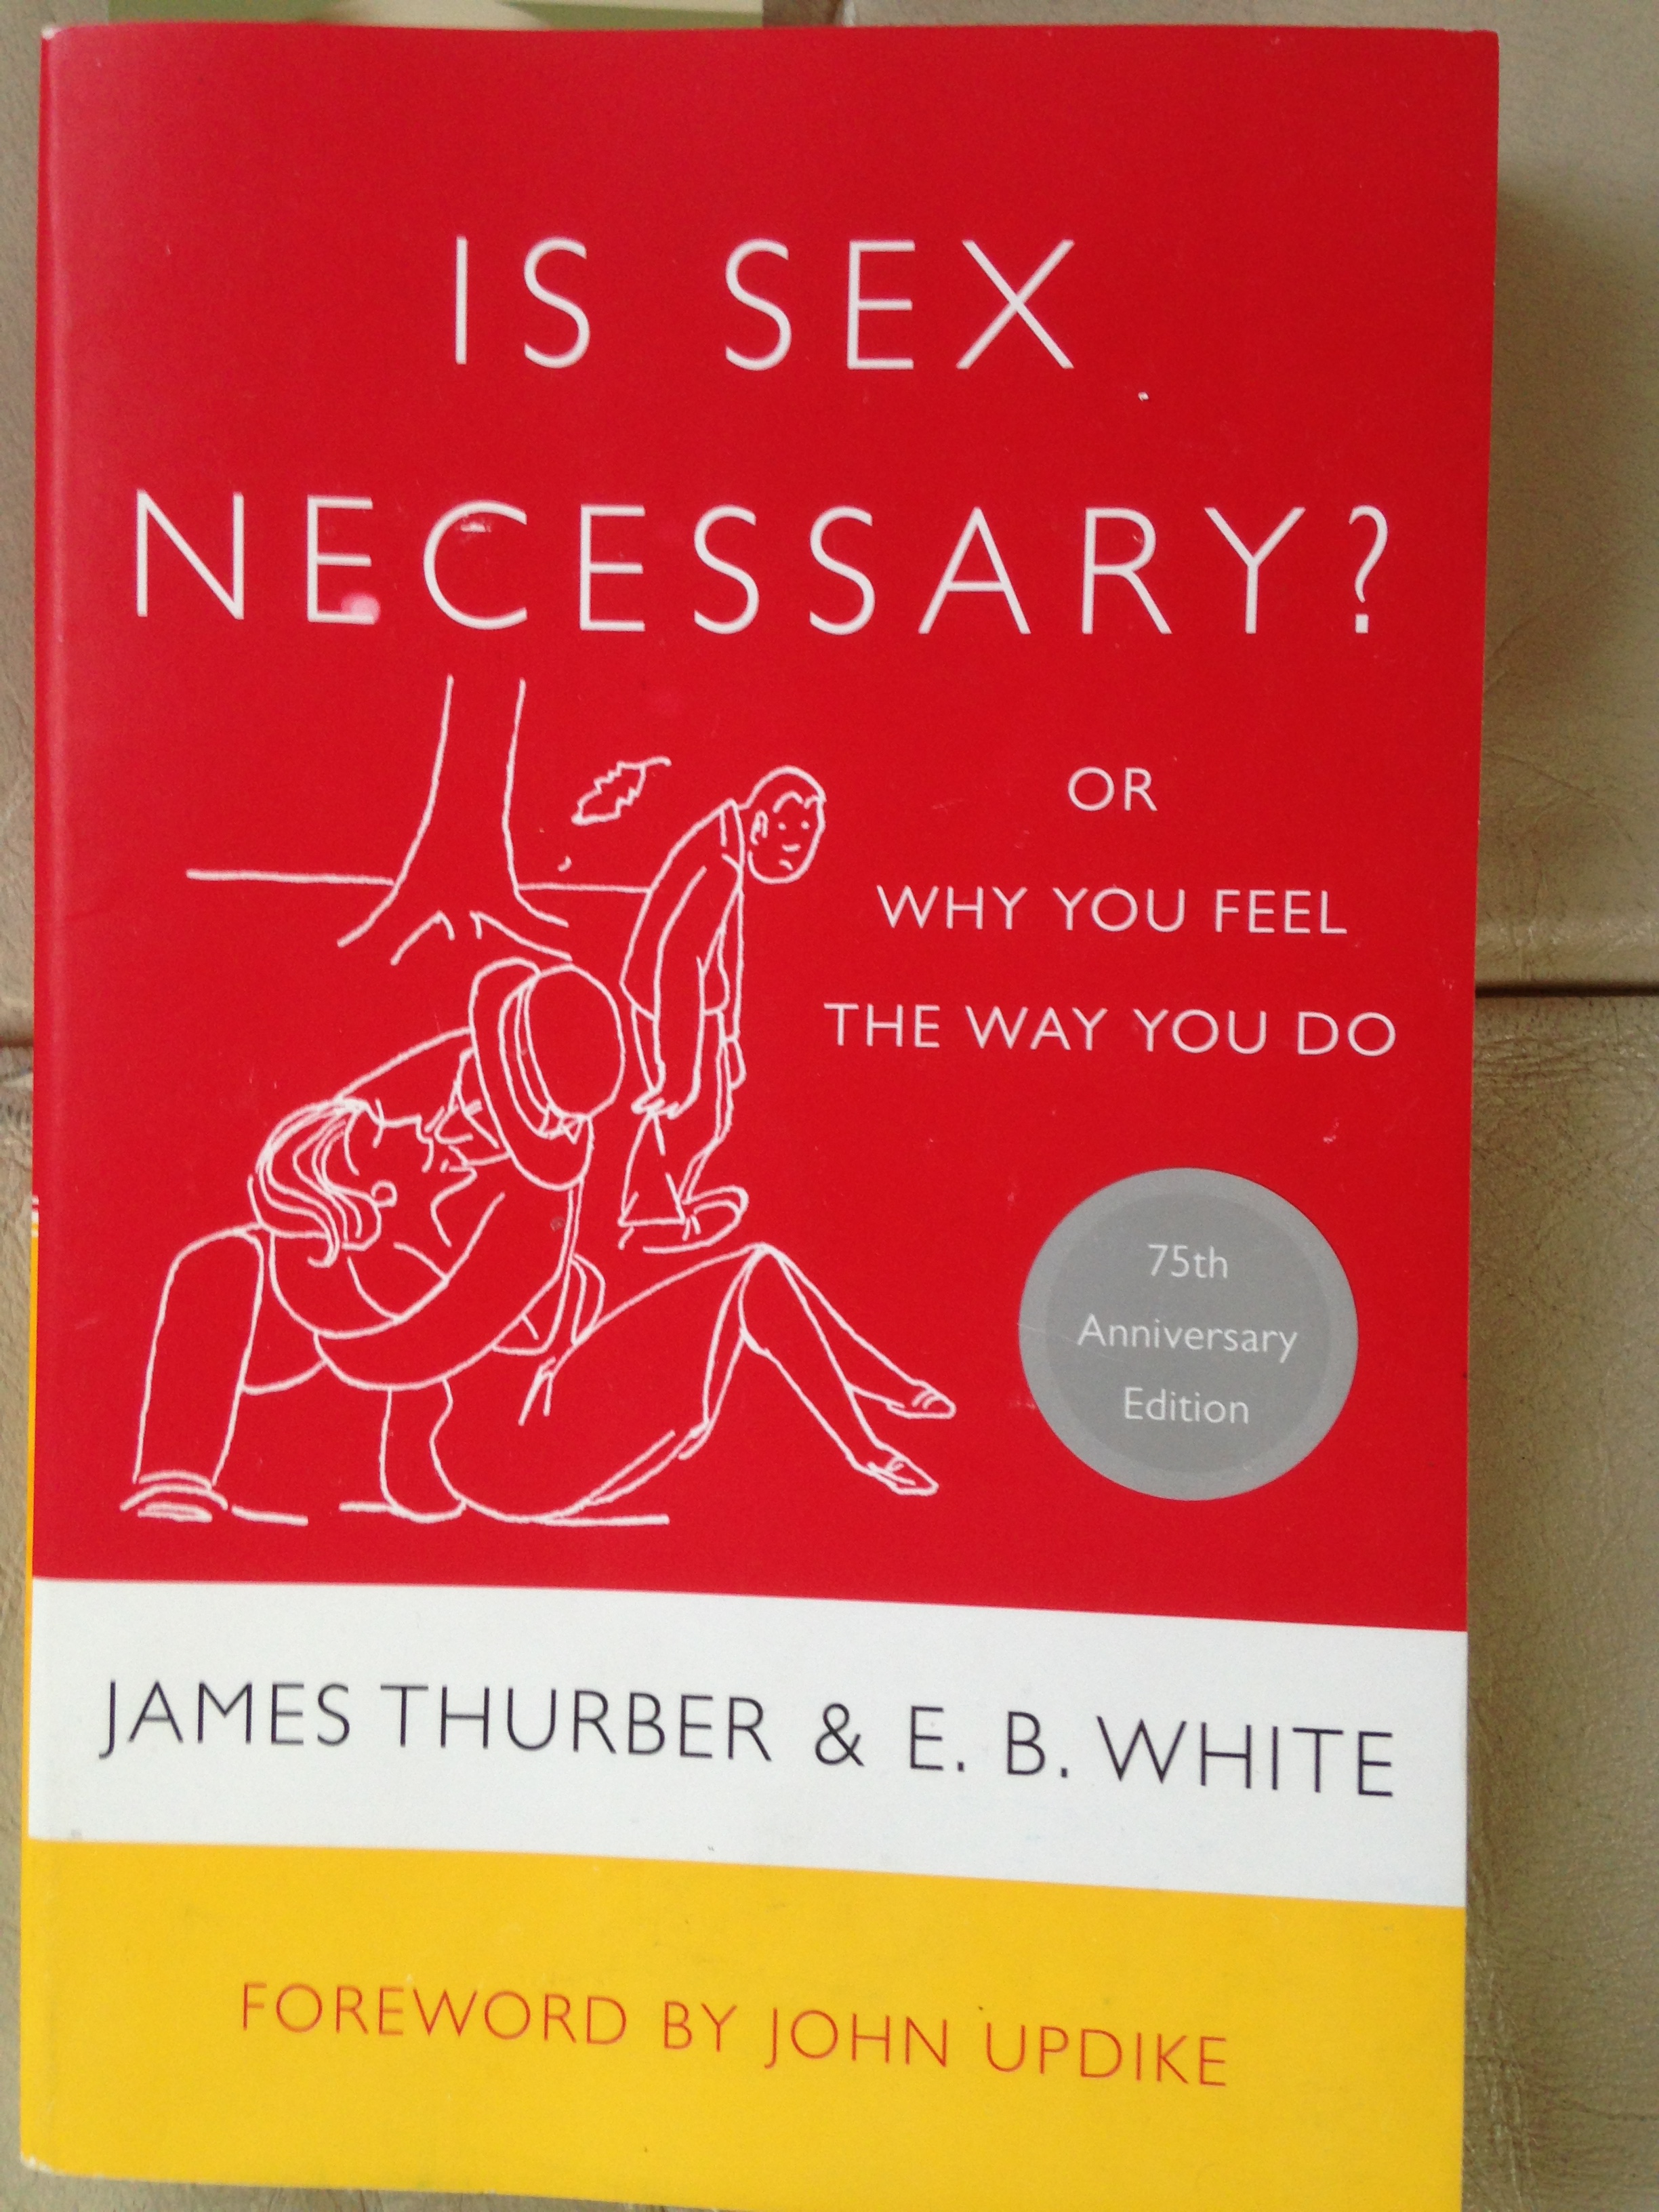 Sex, emotions, and intimacy